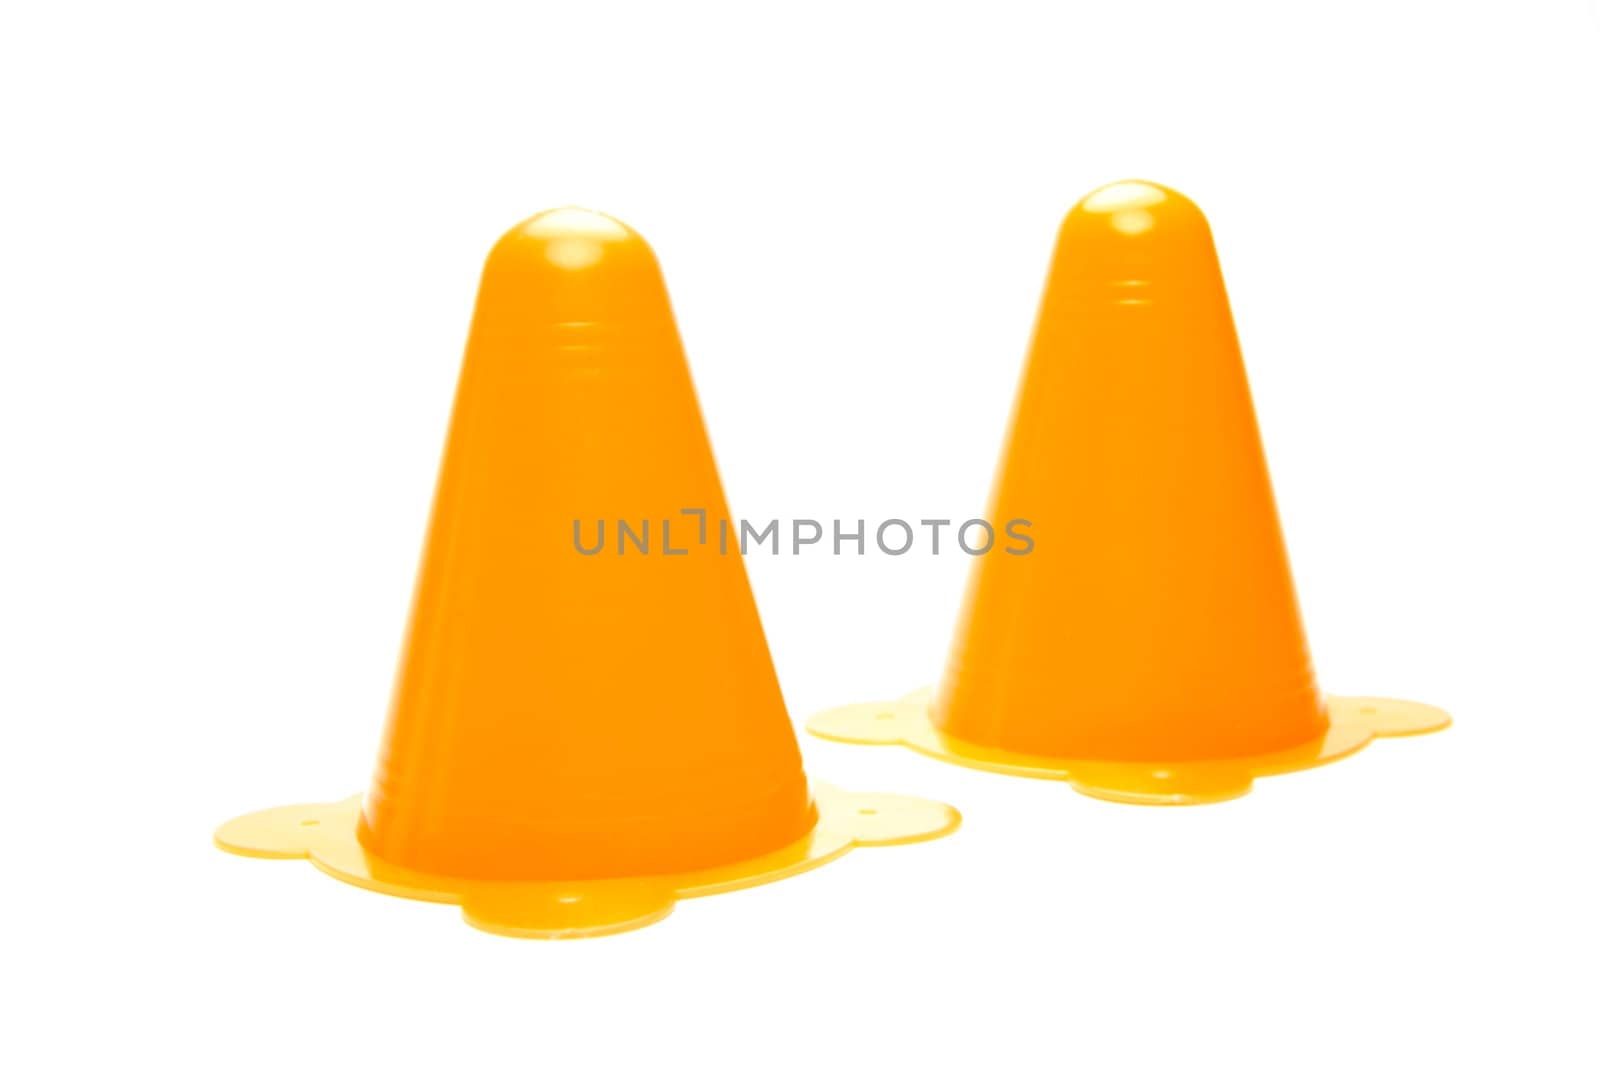 Witches hats isolated against a white background